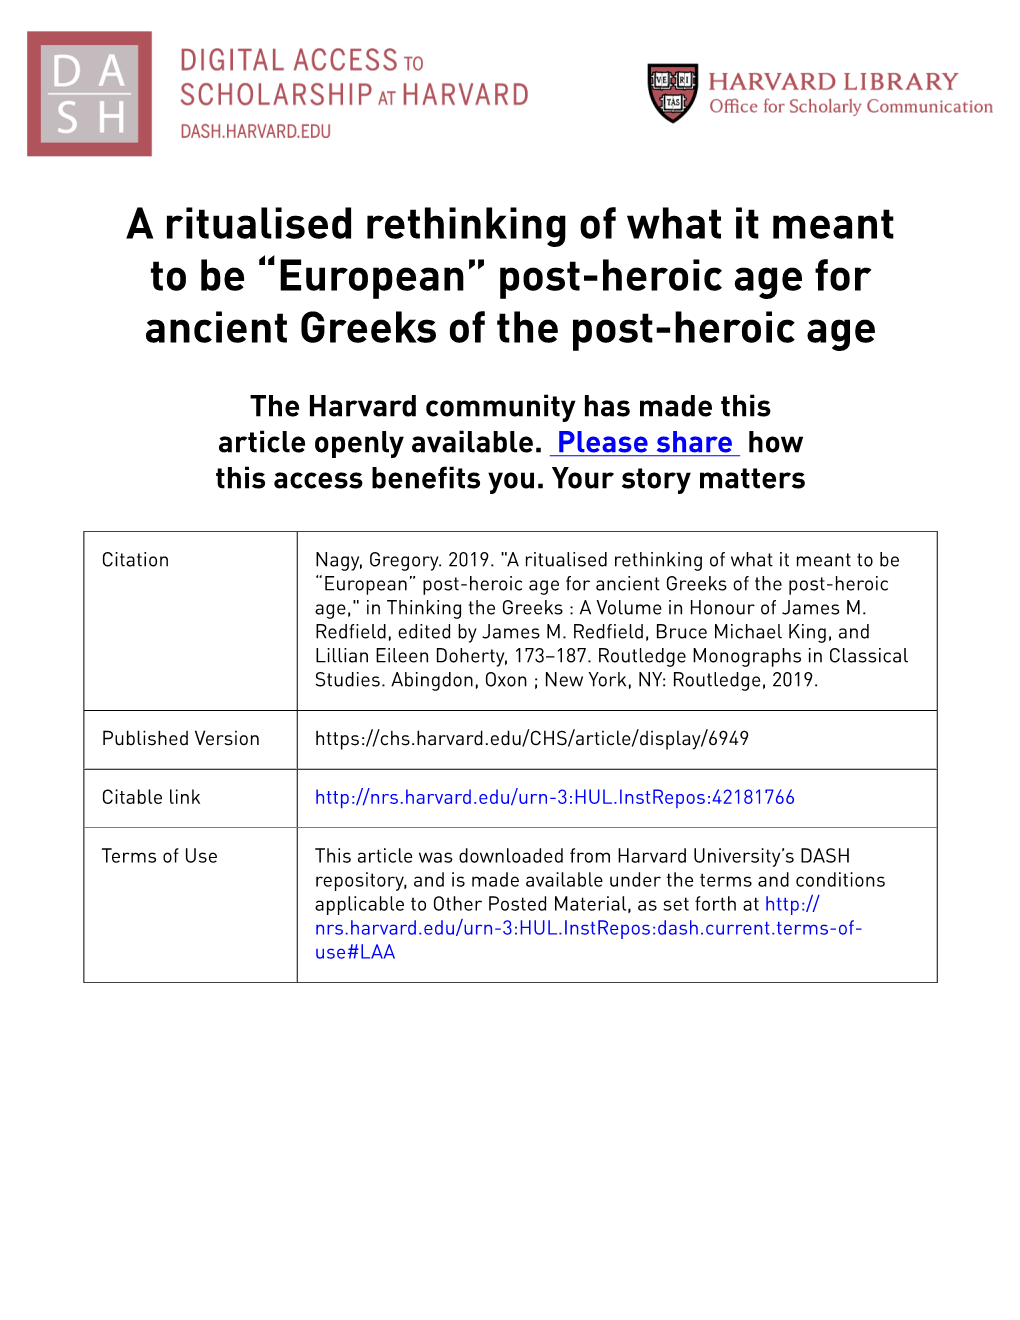 A Ritualised Rethinking of What It Meant to Be “European” Post-Heroic Age for Ancient Greeks of the Post-Heroic Age